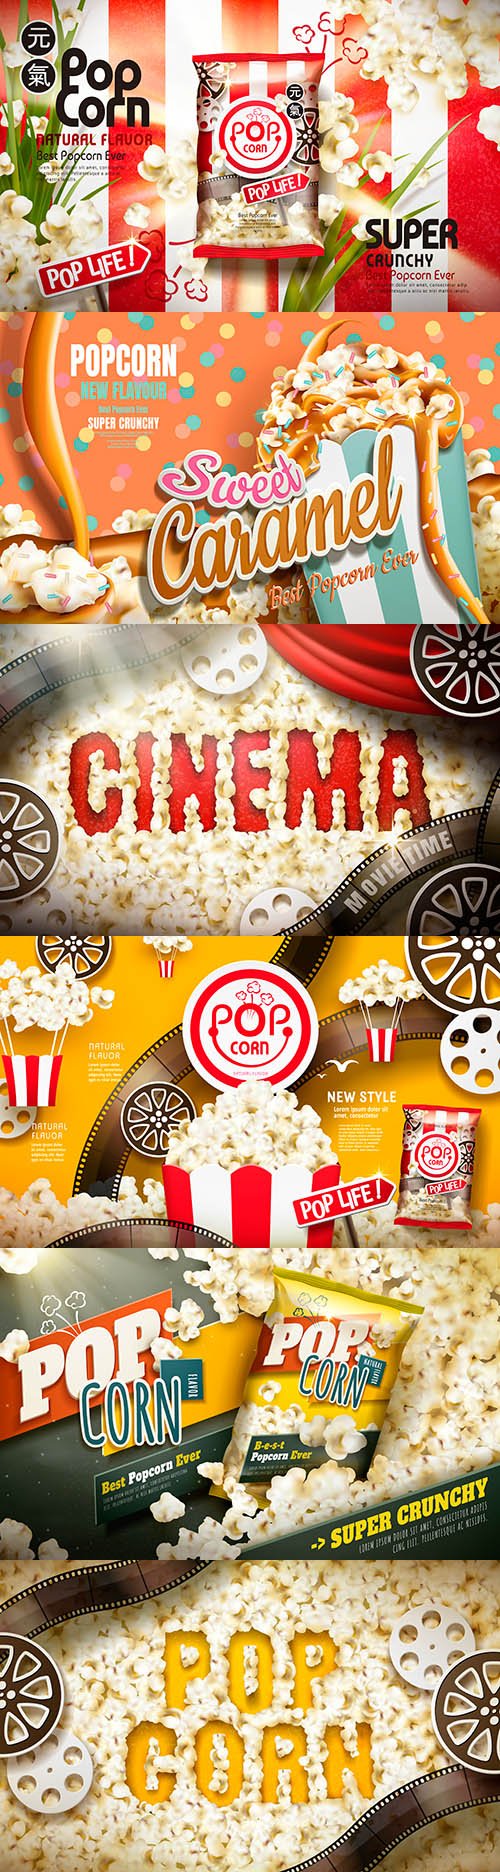 Advertising crisp popcorn with different tastes and foil packaging